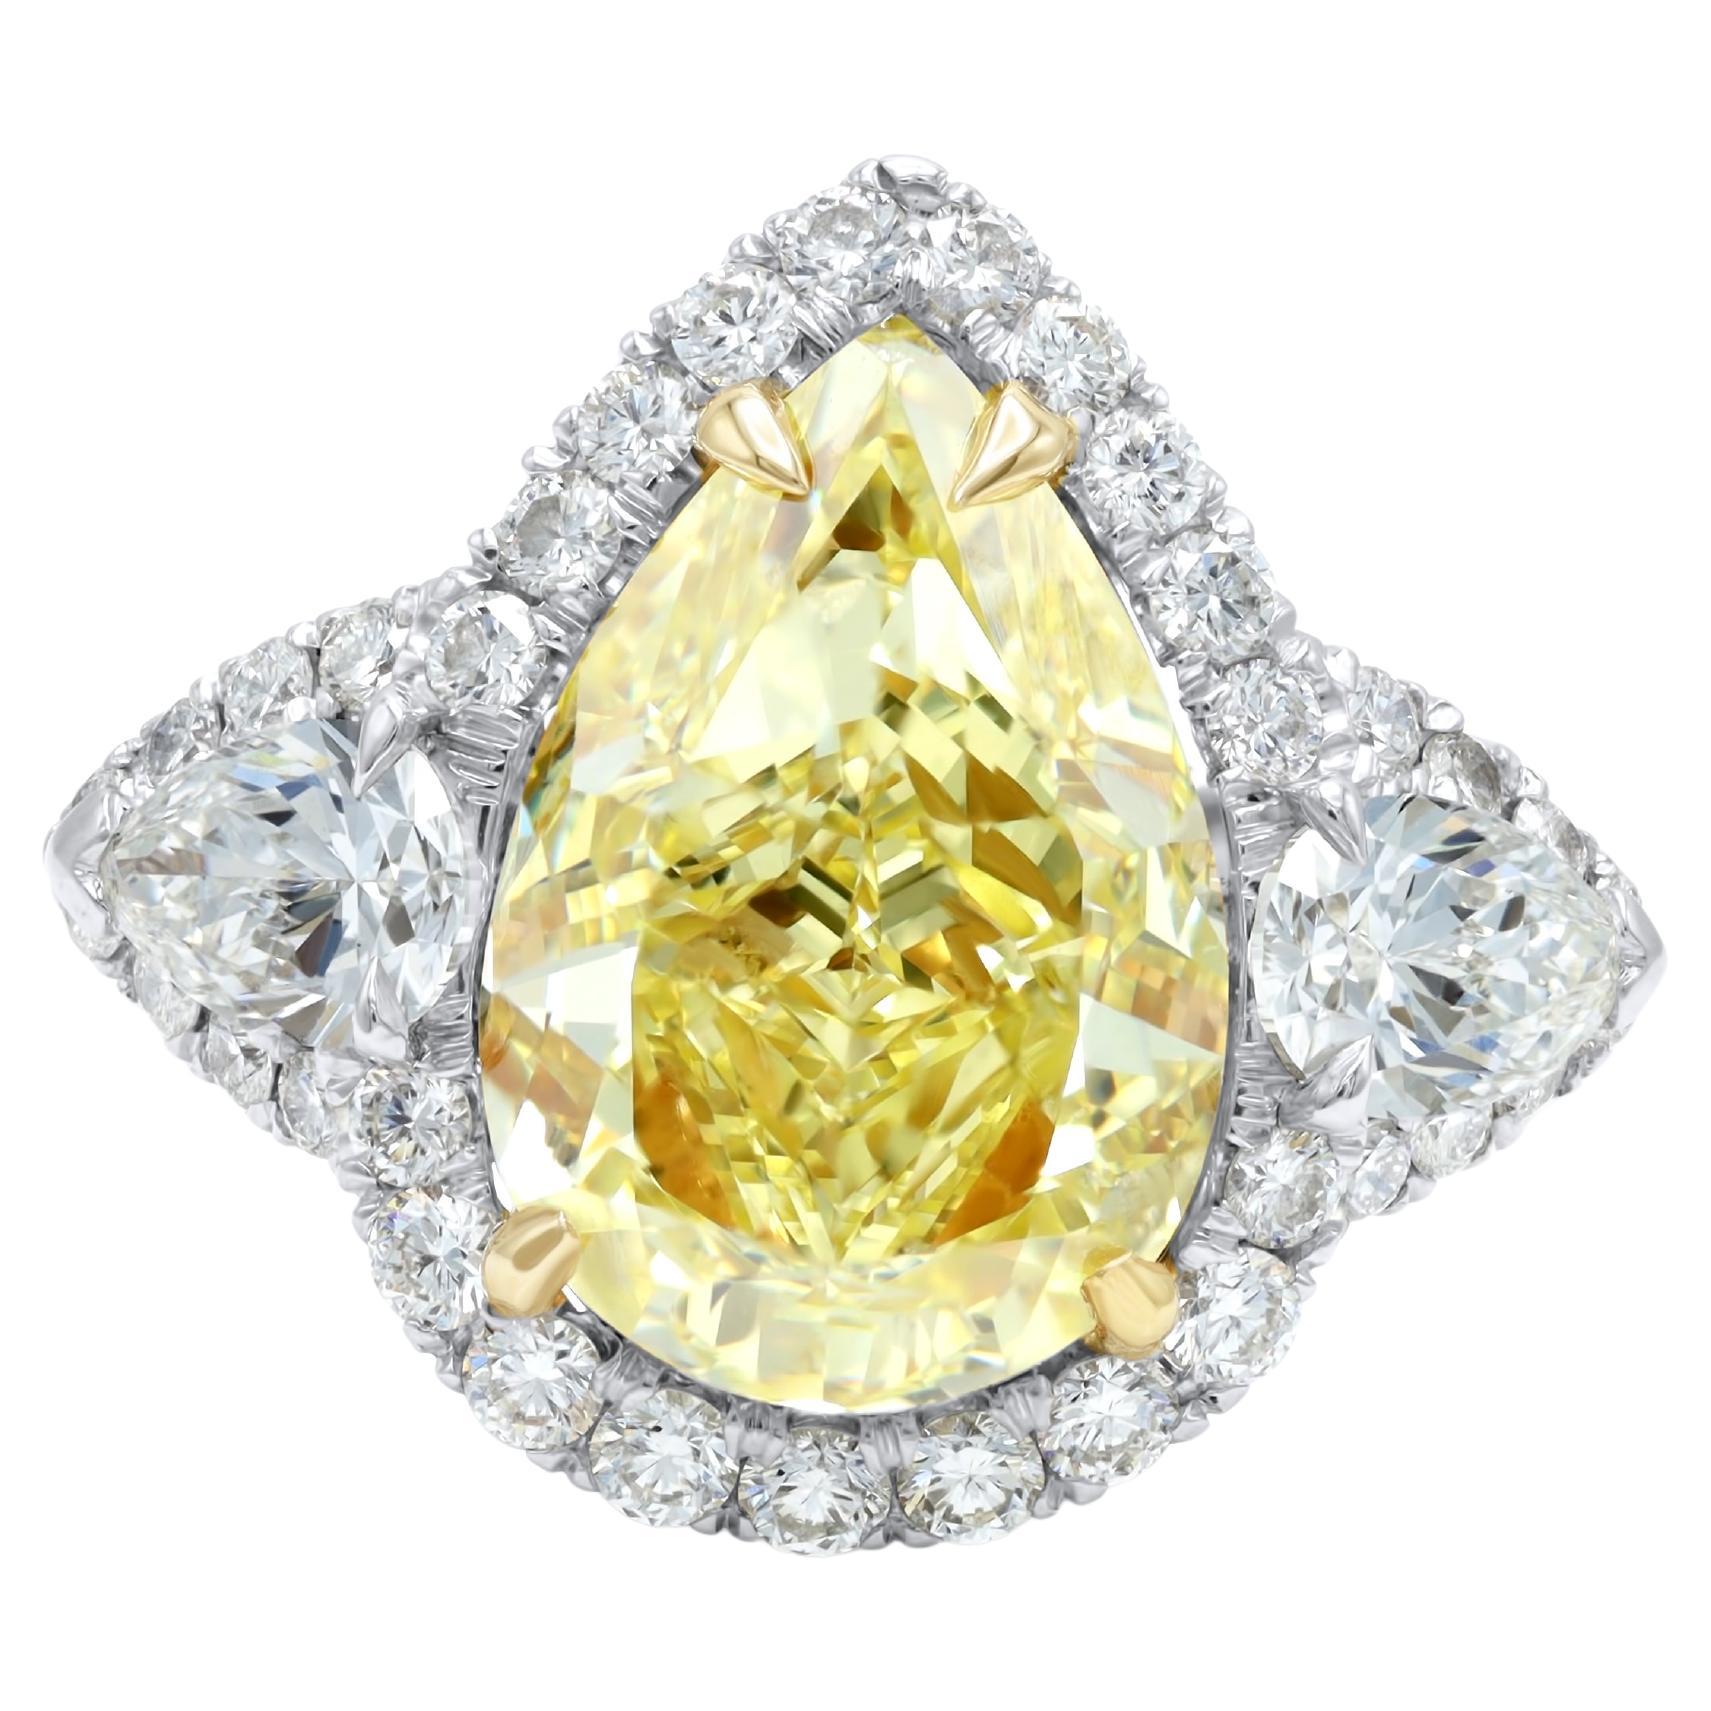 DIANA M. Platinum engagement ring featuring a center 4.18 ct GIA  (FY VS2) PEAR